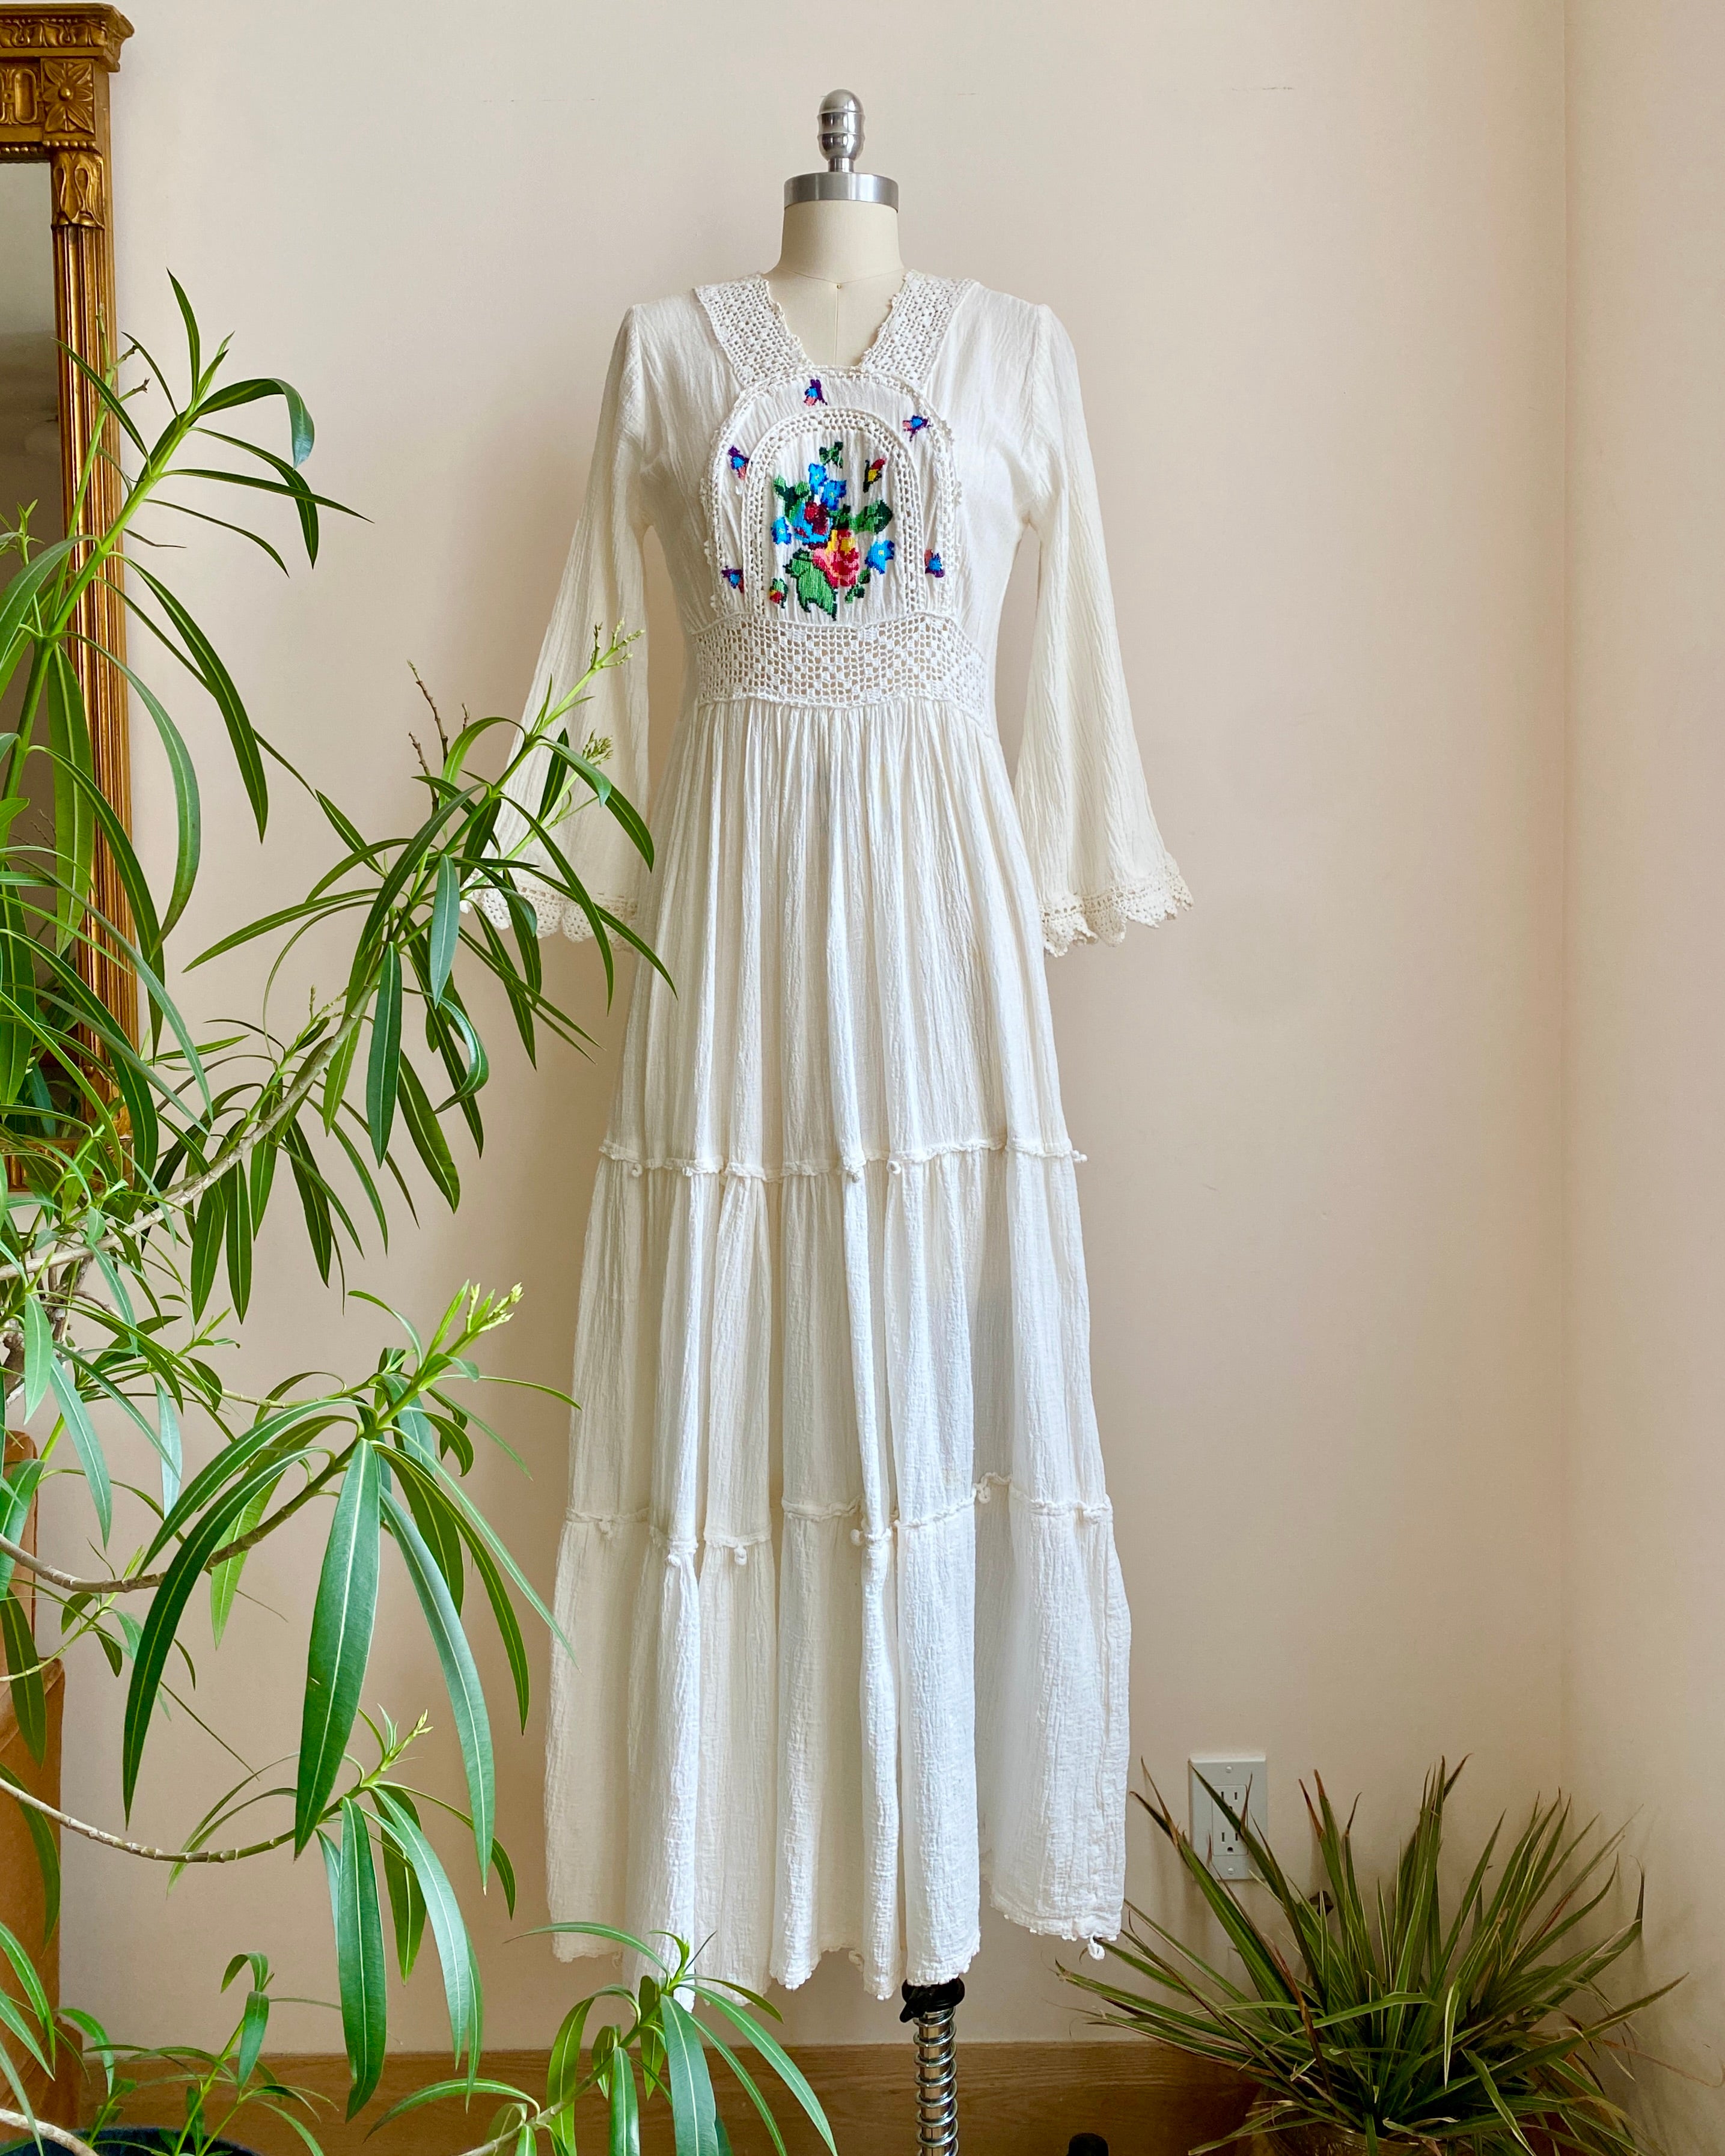 VINTAGE 1970s Cream Cotton Gauze Tiered Bell Sleeve Prairie Maxi Dress with Embroidery and Crochet Details size S 4